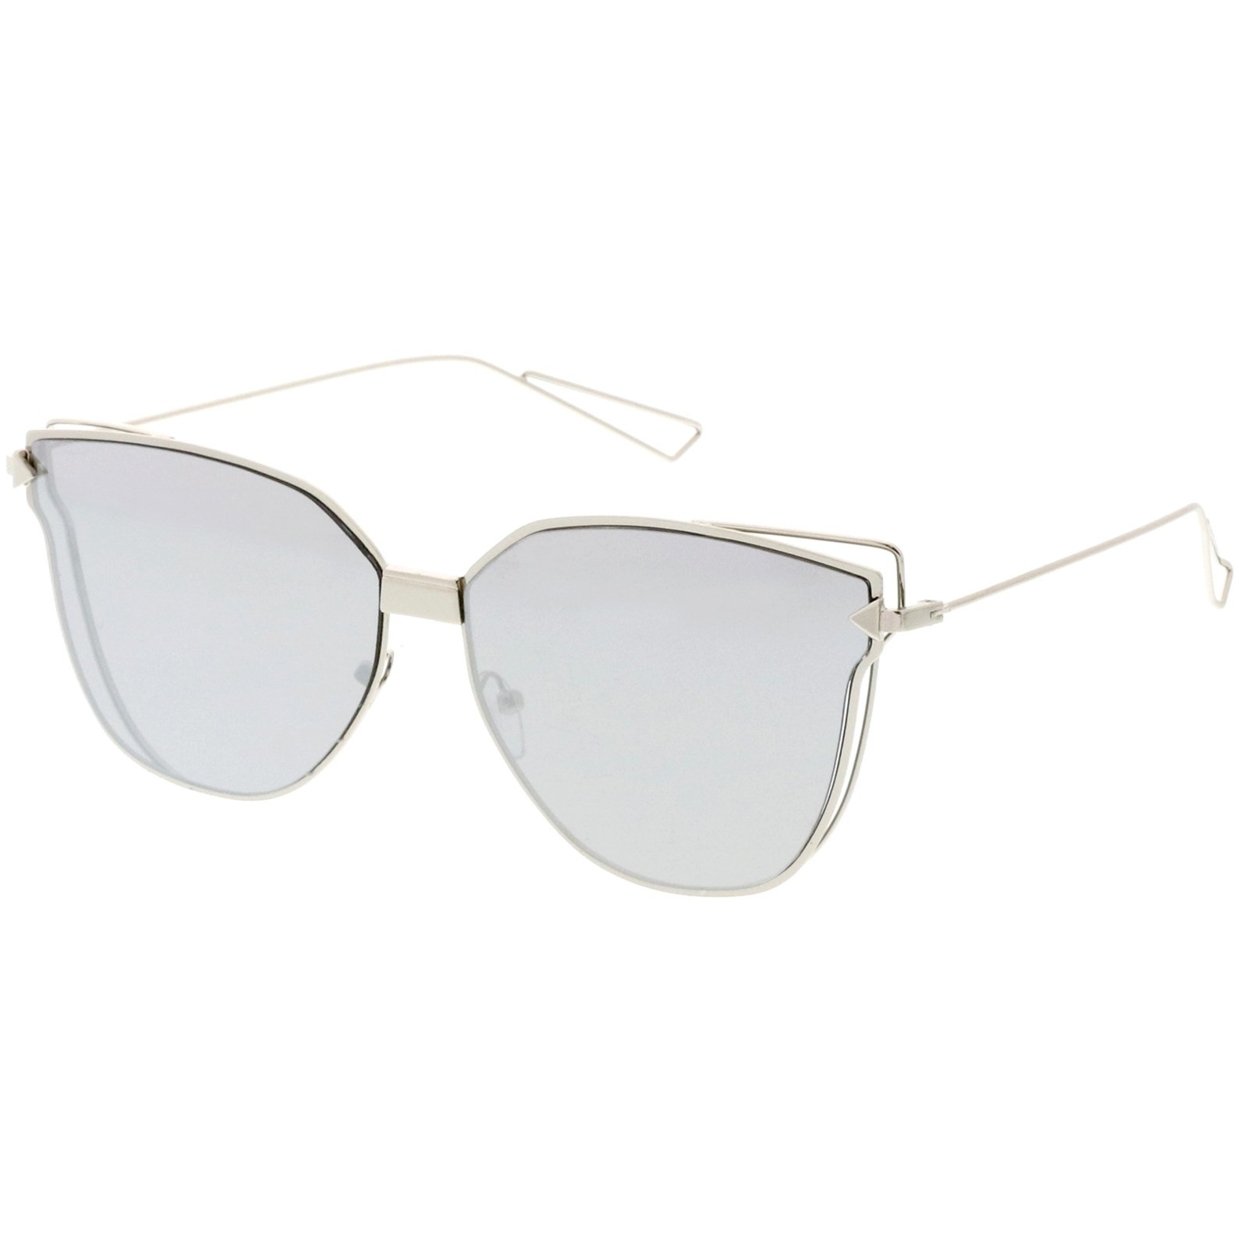 Oversize Cat Eye Sunglasses With Mirrored Flat Lens And Wire Arms 59mm - Silver / Blue Mirror